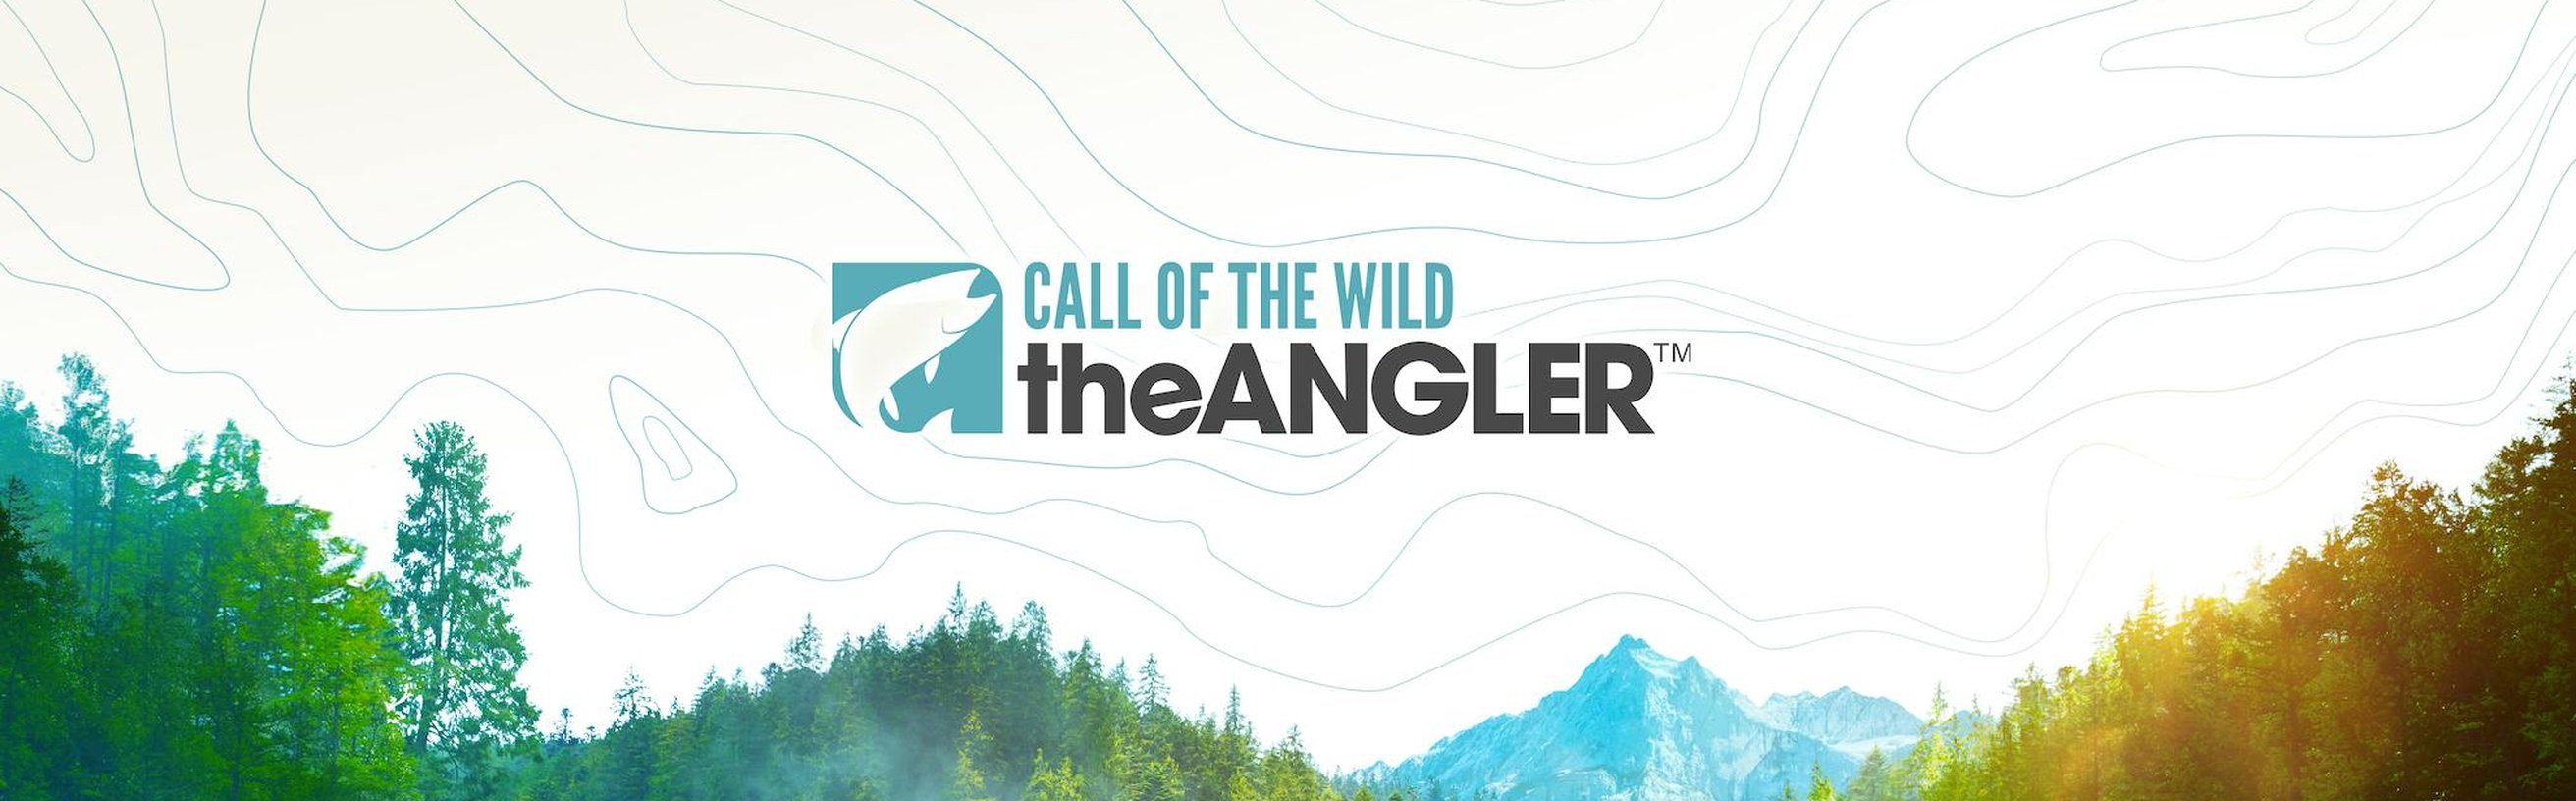 theHunter: Call of the Wild - 2022 Edition Is Out Now - Avalanche